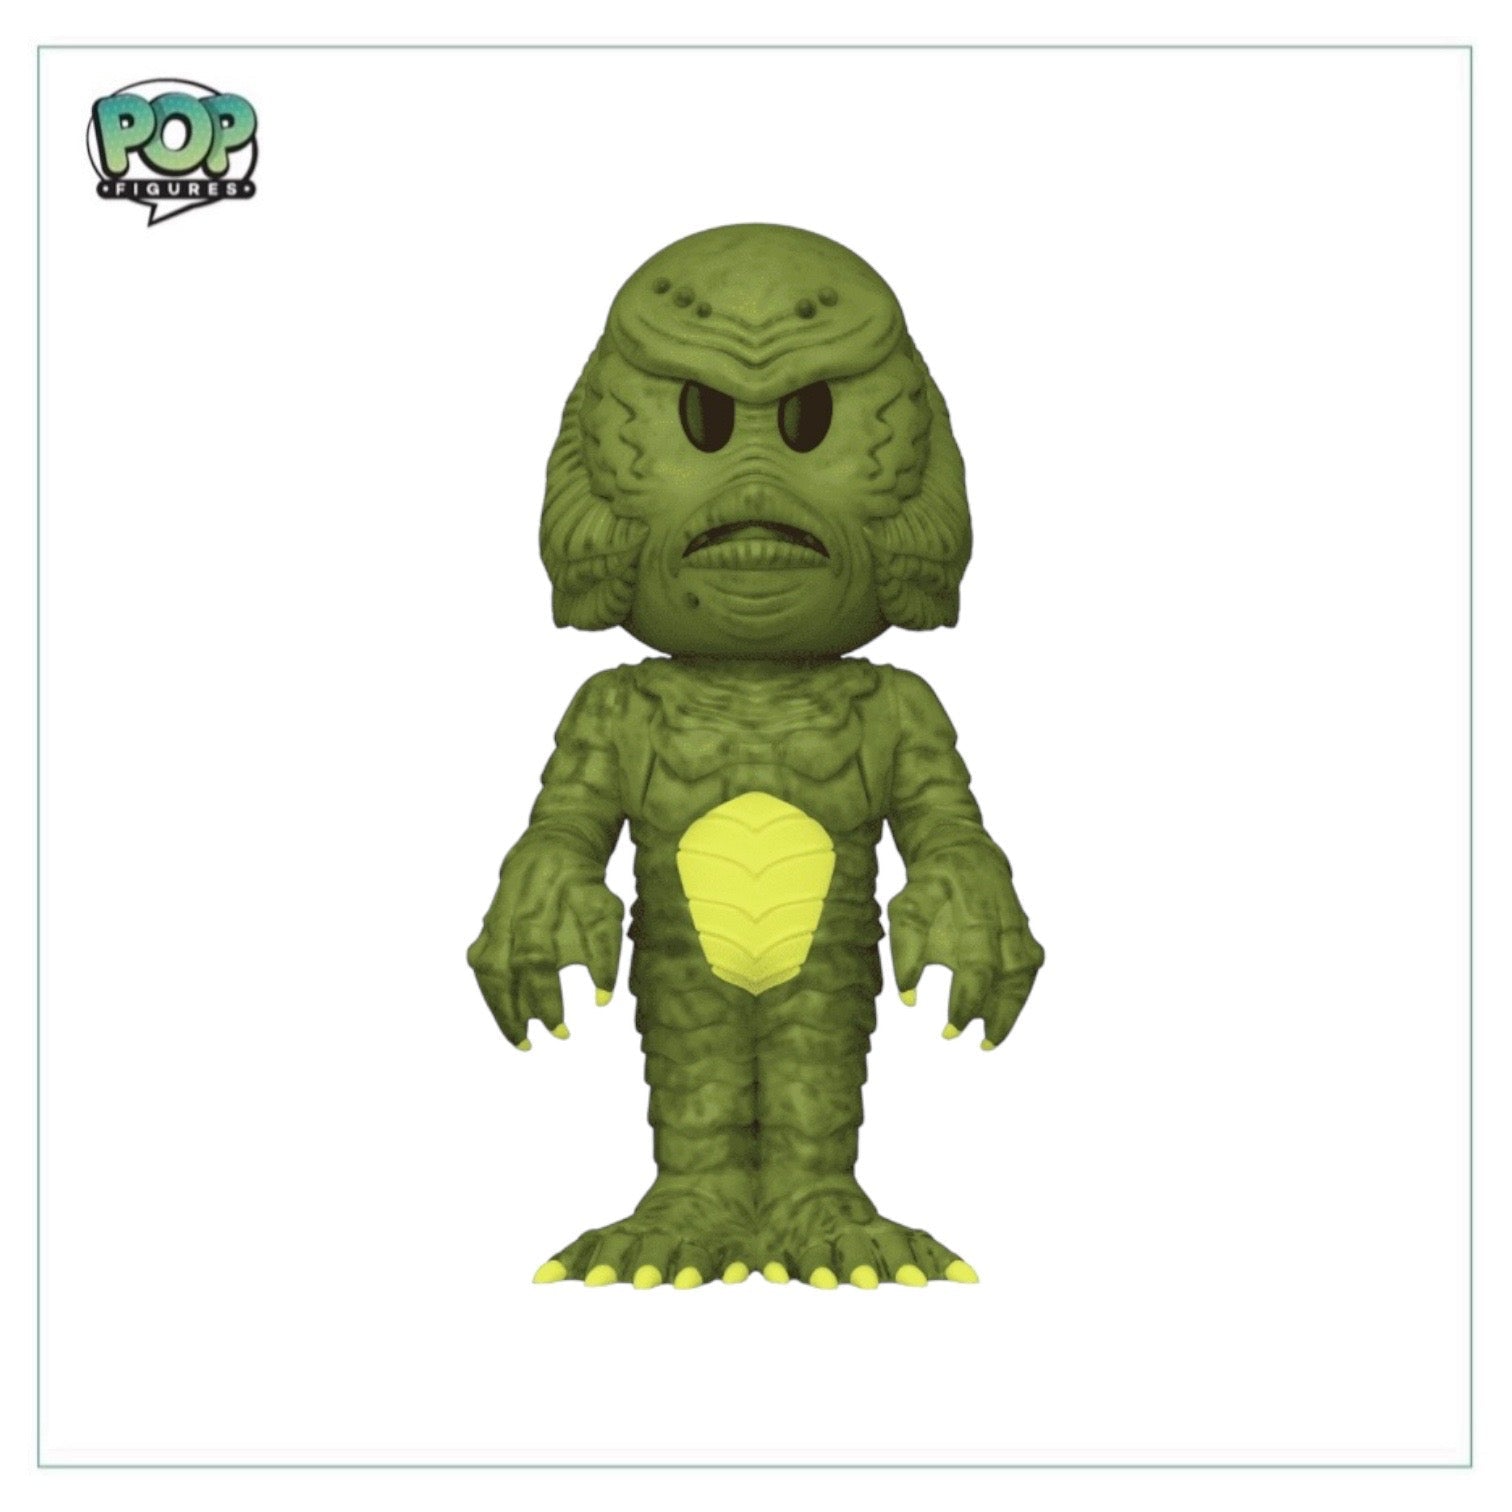 Creature From The Black Lagoon Funko Soda Vinyl Figure! - Universal Monsters - International LE7500 Pcs - Chance of Chase